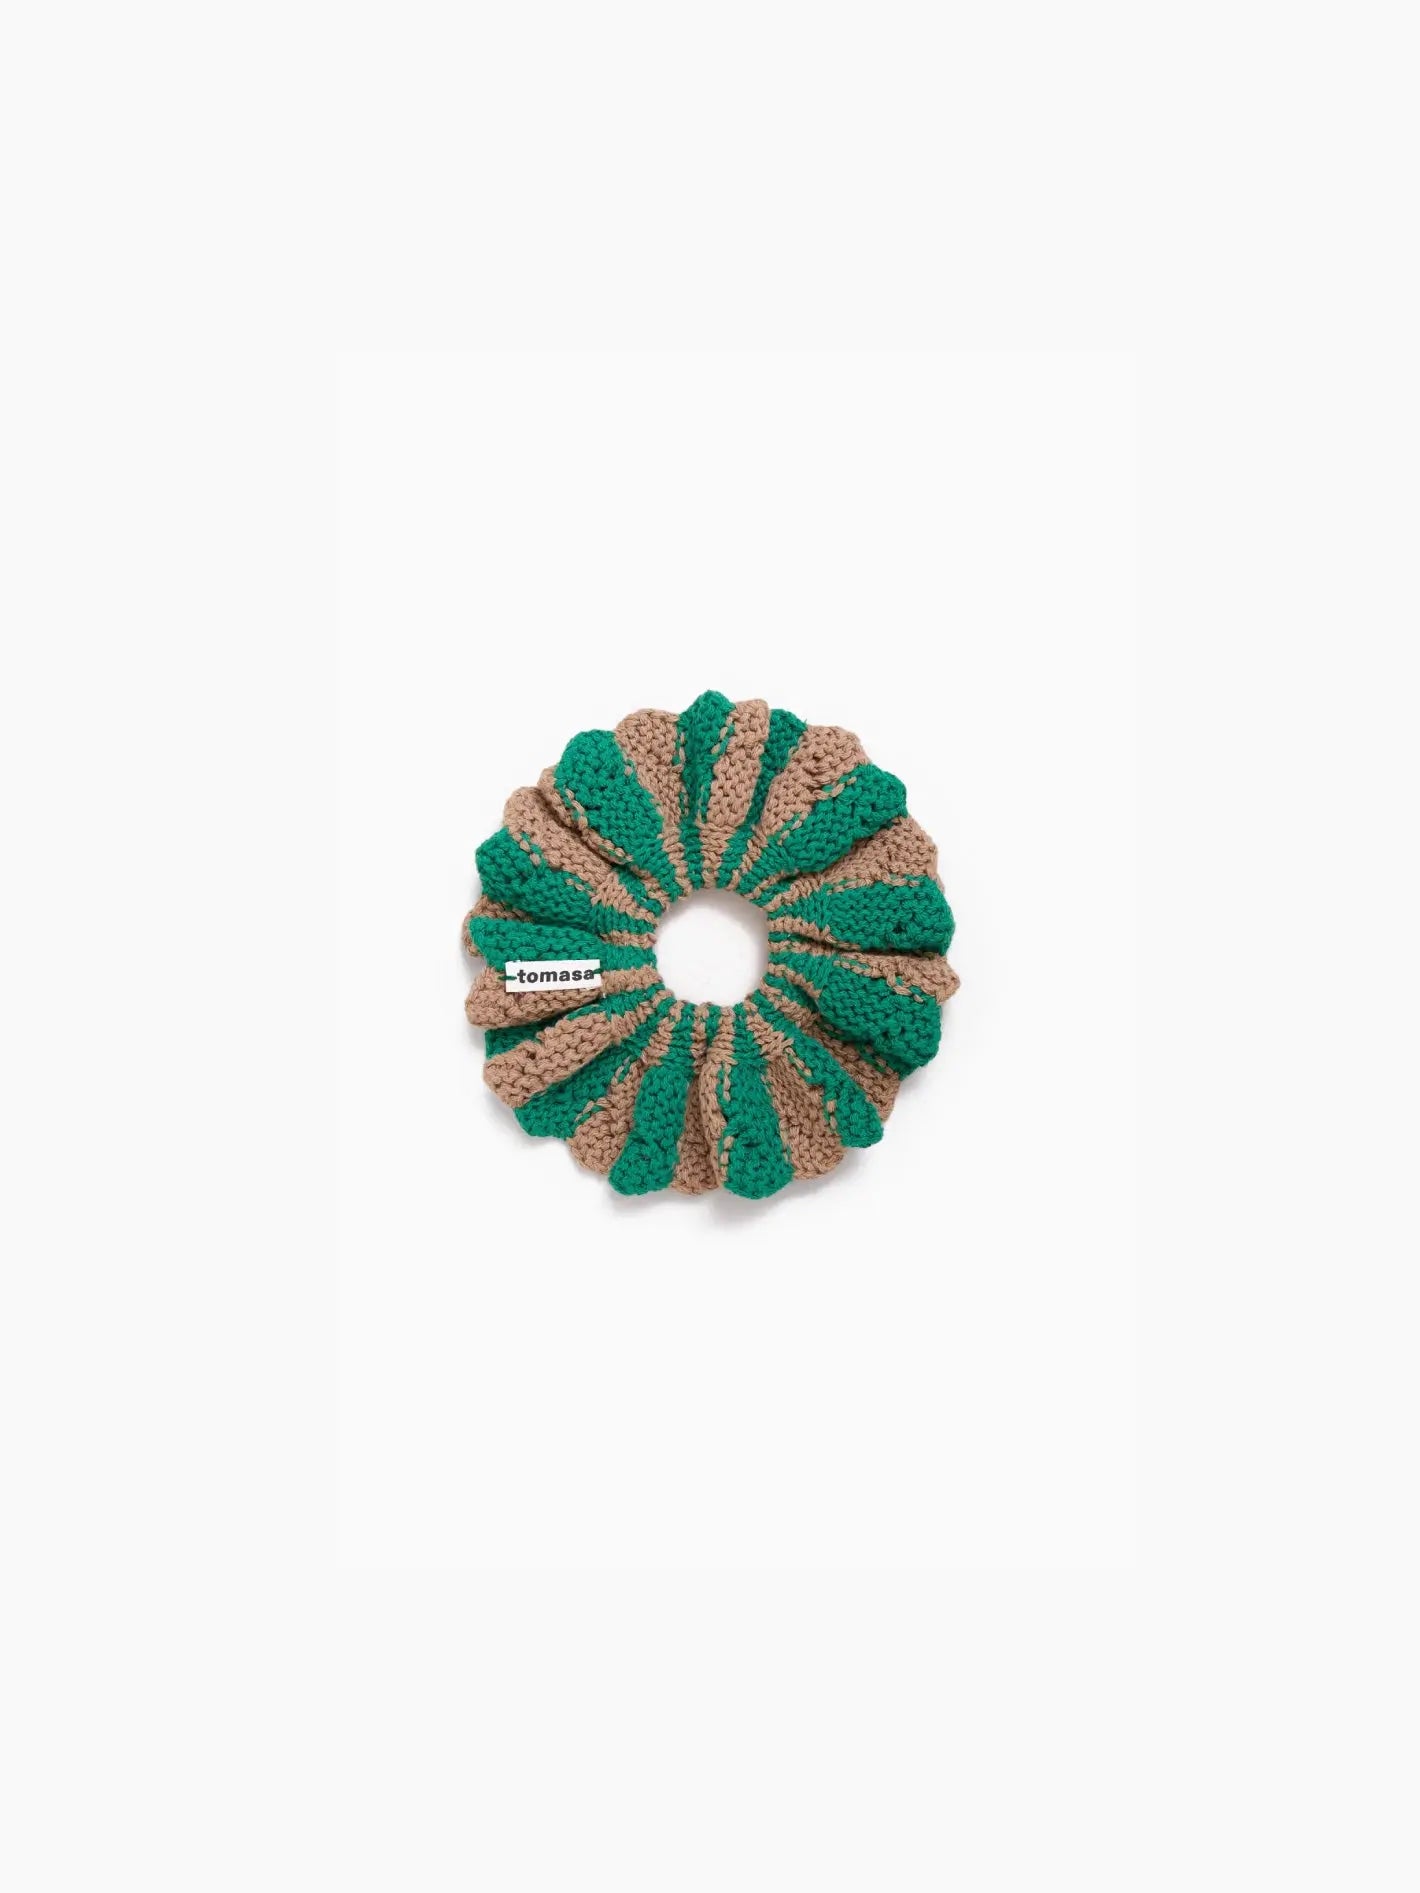 A round, textured hair scrunchie with alternating green and beige sections, displayed on a plain white background. A small tag with the brand name "Tomasa" is attached to the scrunchie. Available exclusively at Bassalstore in Barcelona.